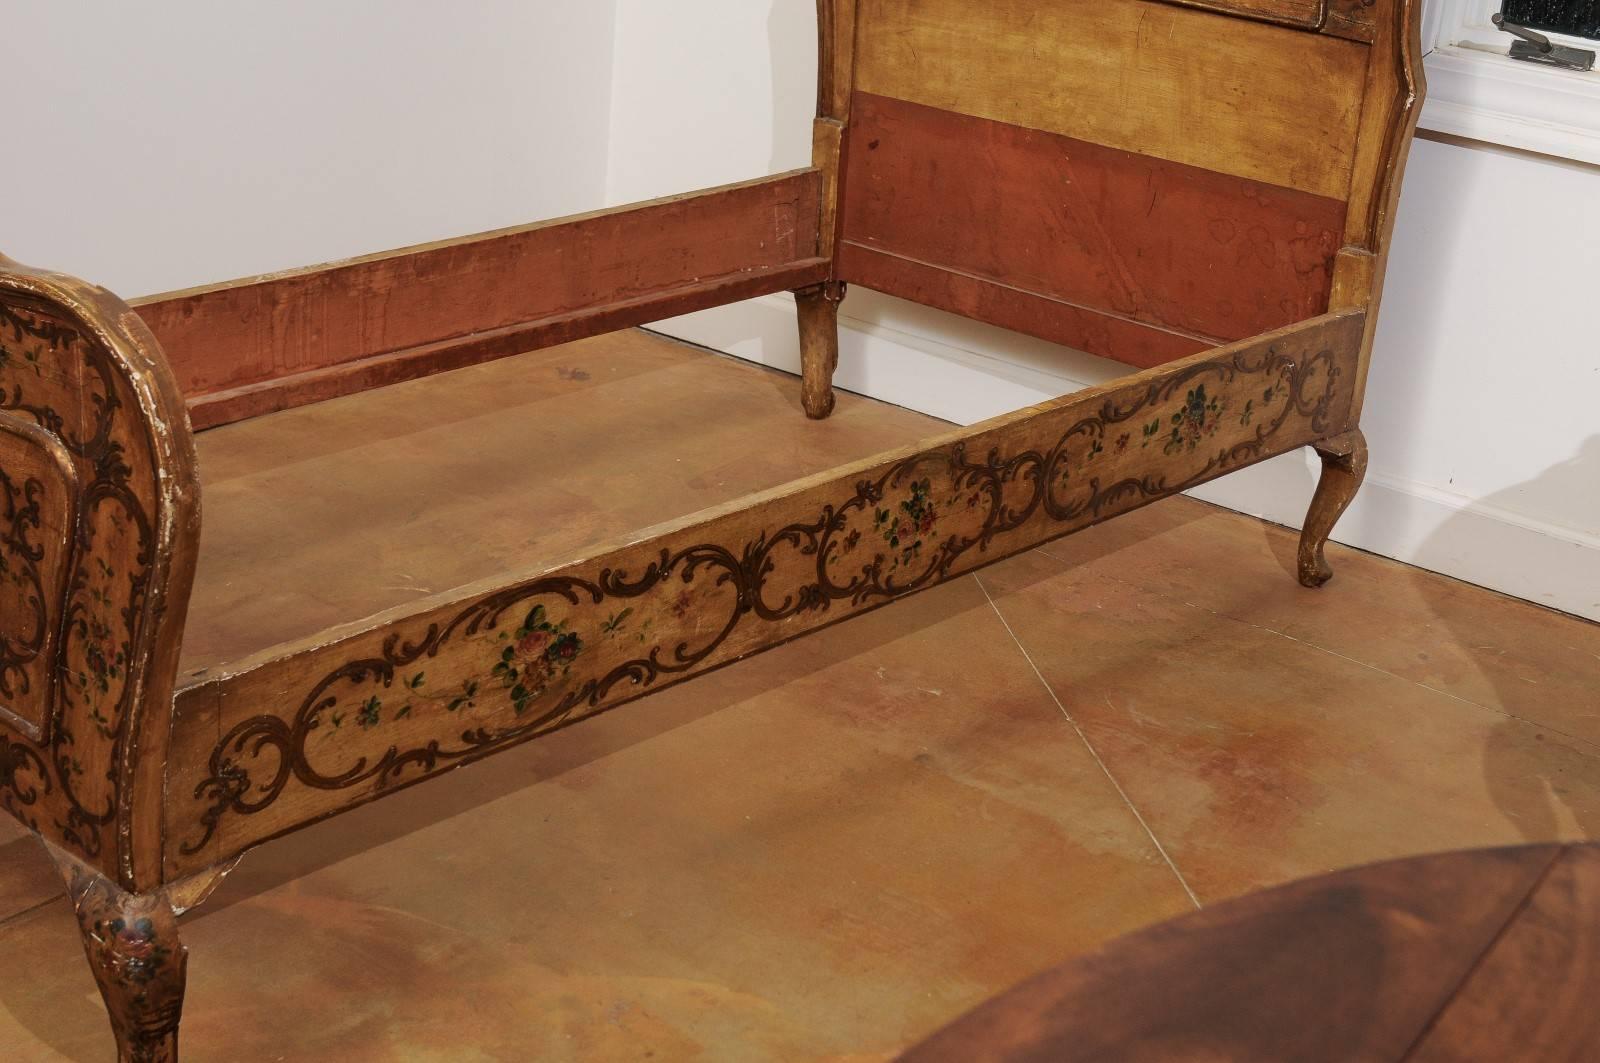 Wood Italian Rococo Style Early 19th Century Bed Frame with Floral and Bird Décor